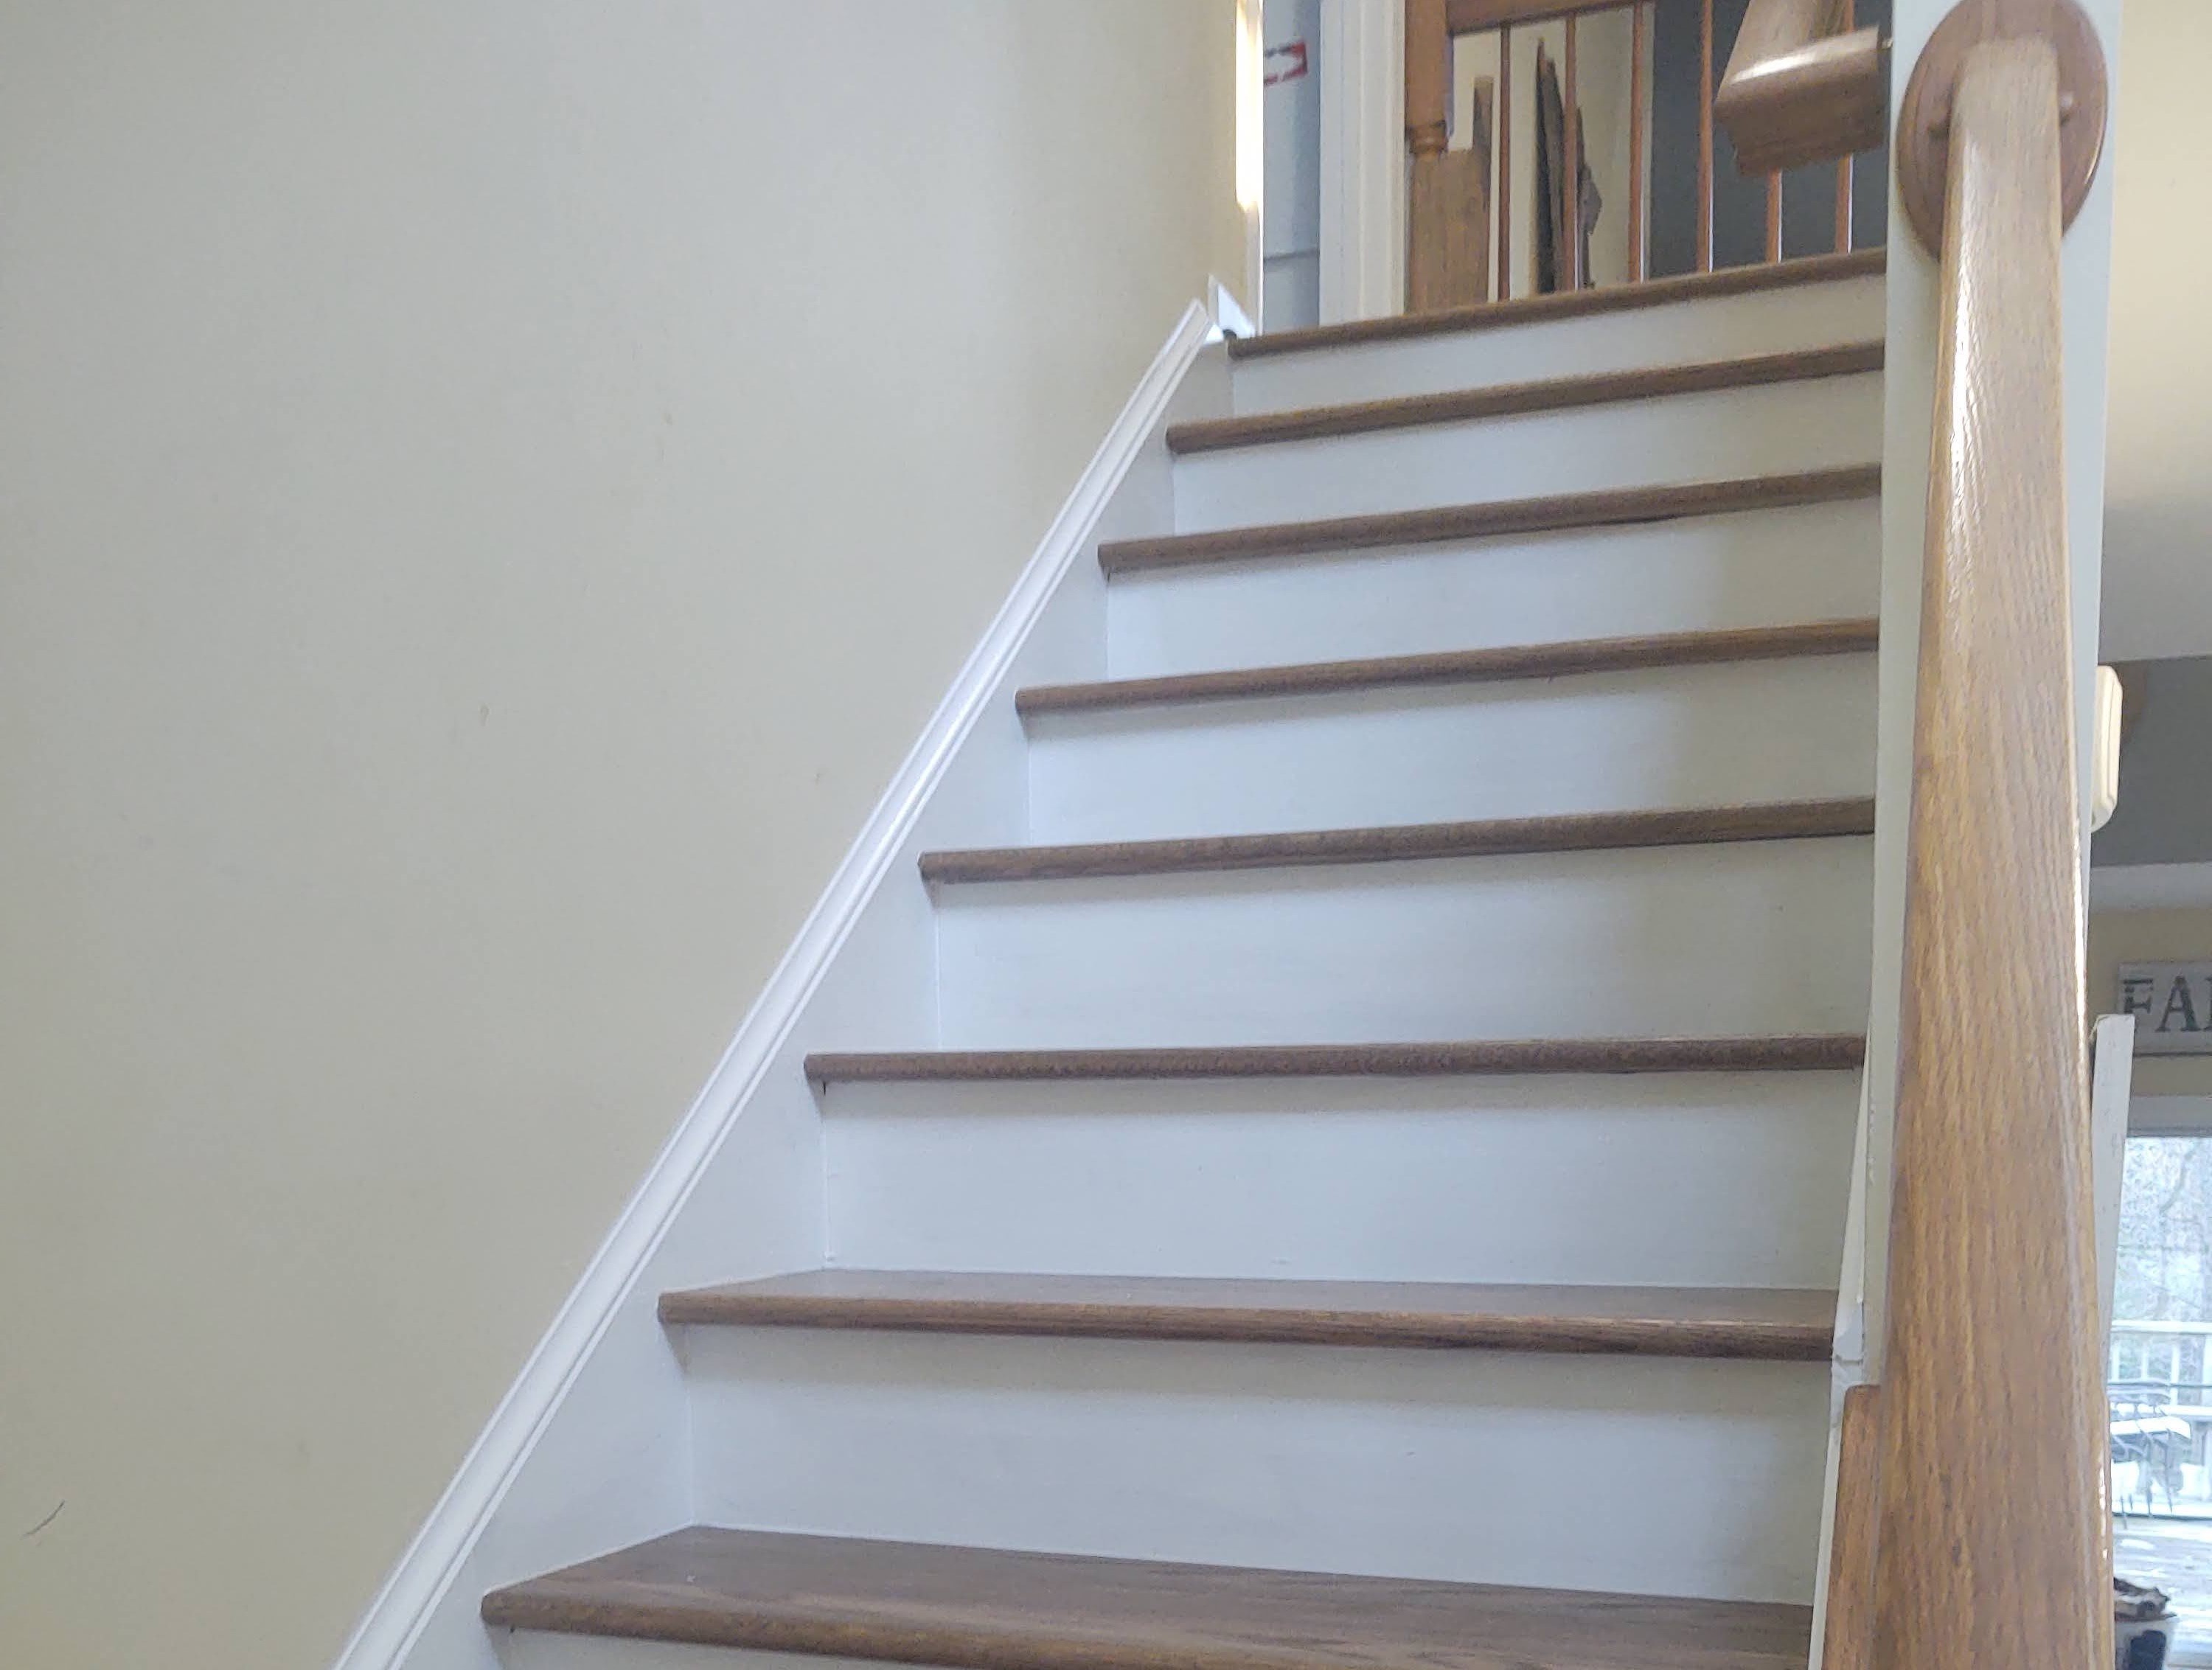 We can take your stairs from one extreme to the other.